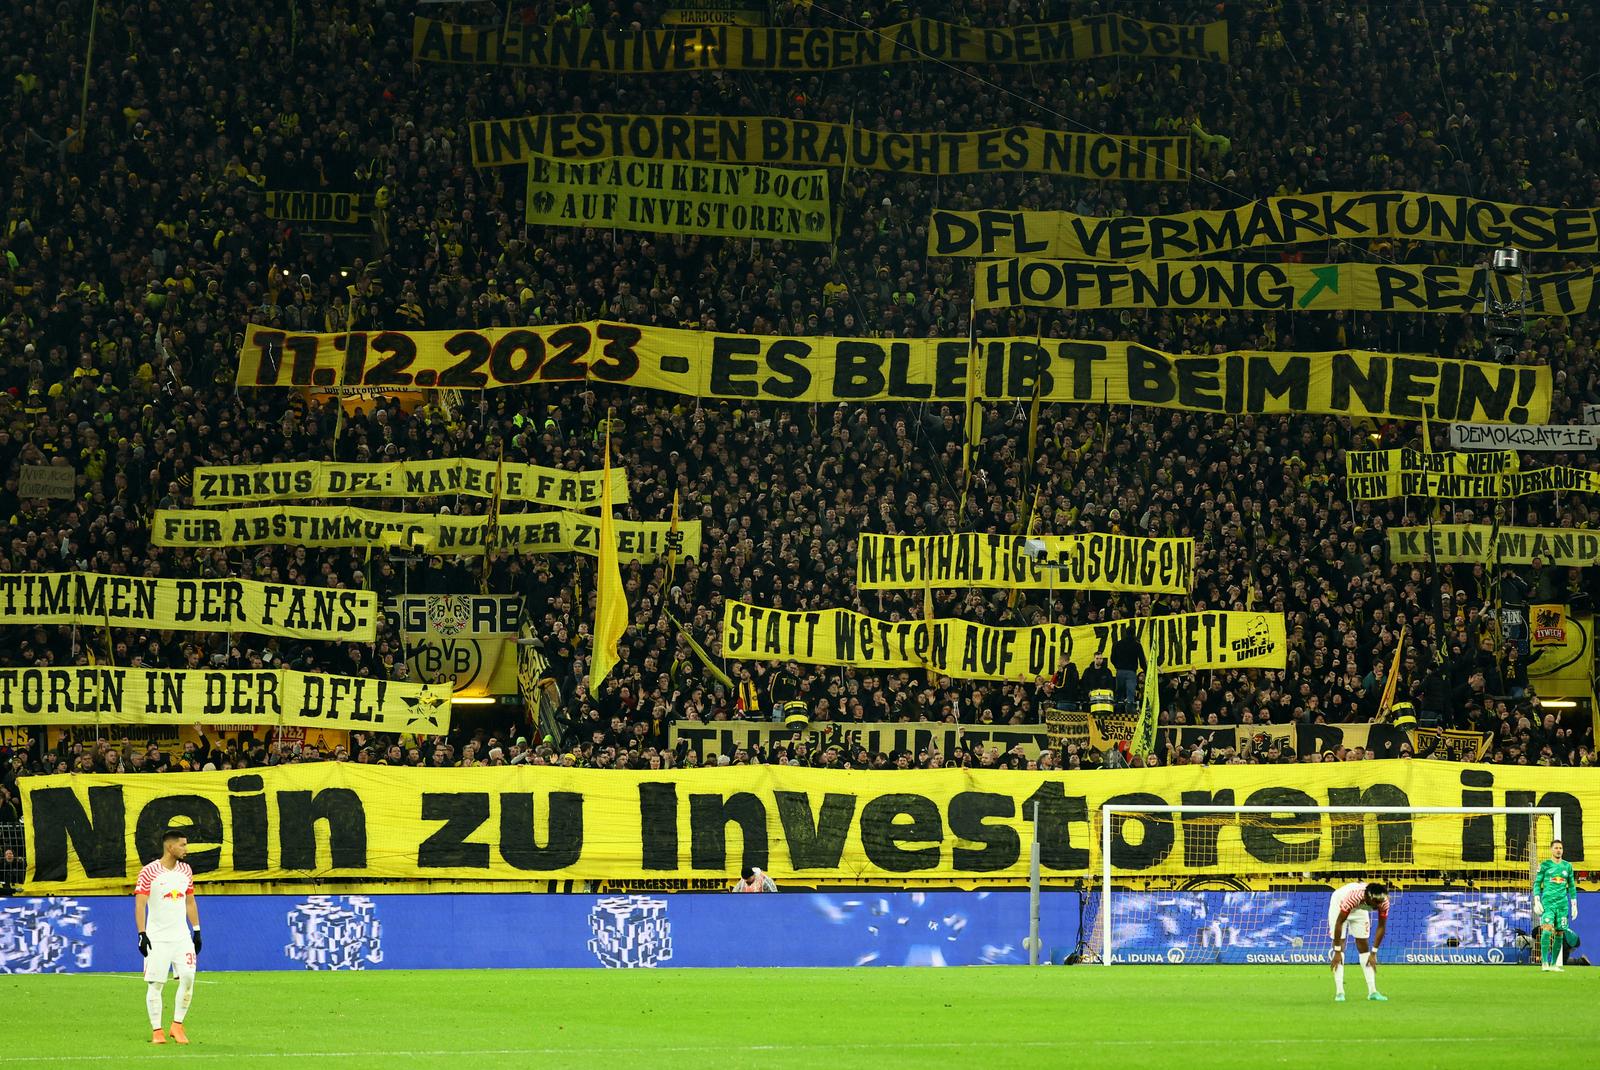 Soccer Football - Bundesliga - Borussia Dortmund v RB Leipzig - Signal Iduna Park, Dortmund, Germany - December 9, 2023 Borussia Dortmund fans display banners in the stands during the match REUTERS/Wolfgang Rattay DFL REGULATIONS PROHIBIT ANY USE OF PHOTOGRAPHS AS IMAGE SEQUENCES AND/OR QUASI-VIDEO. Photo: Wolfgang Rattay/REUTERS